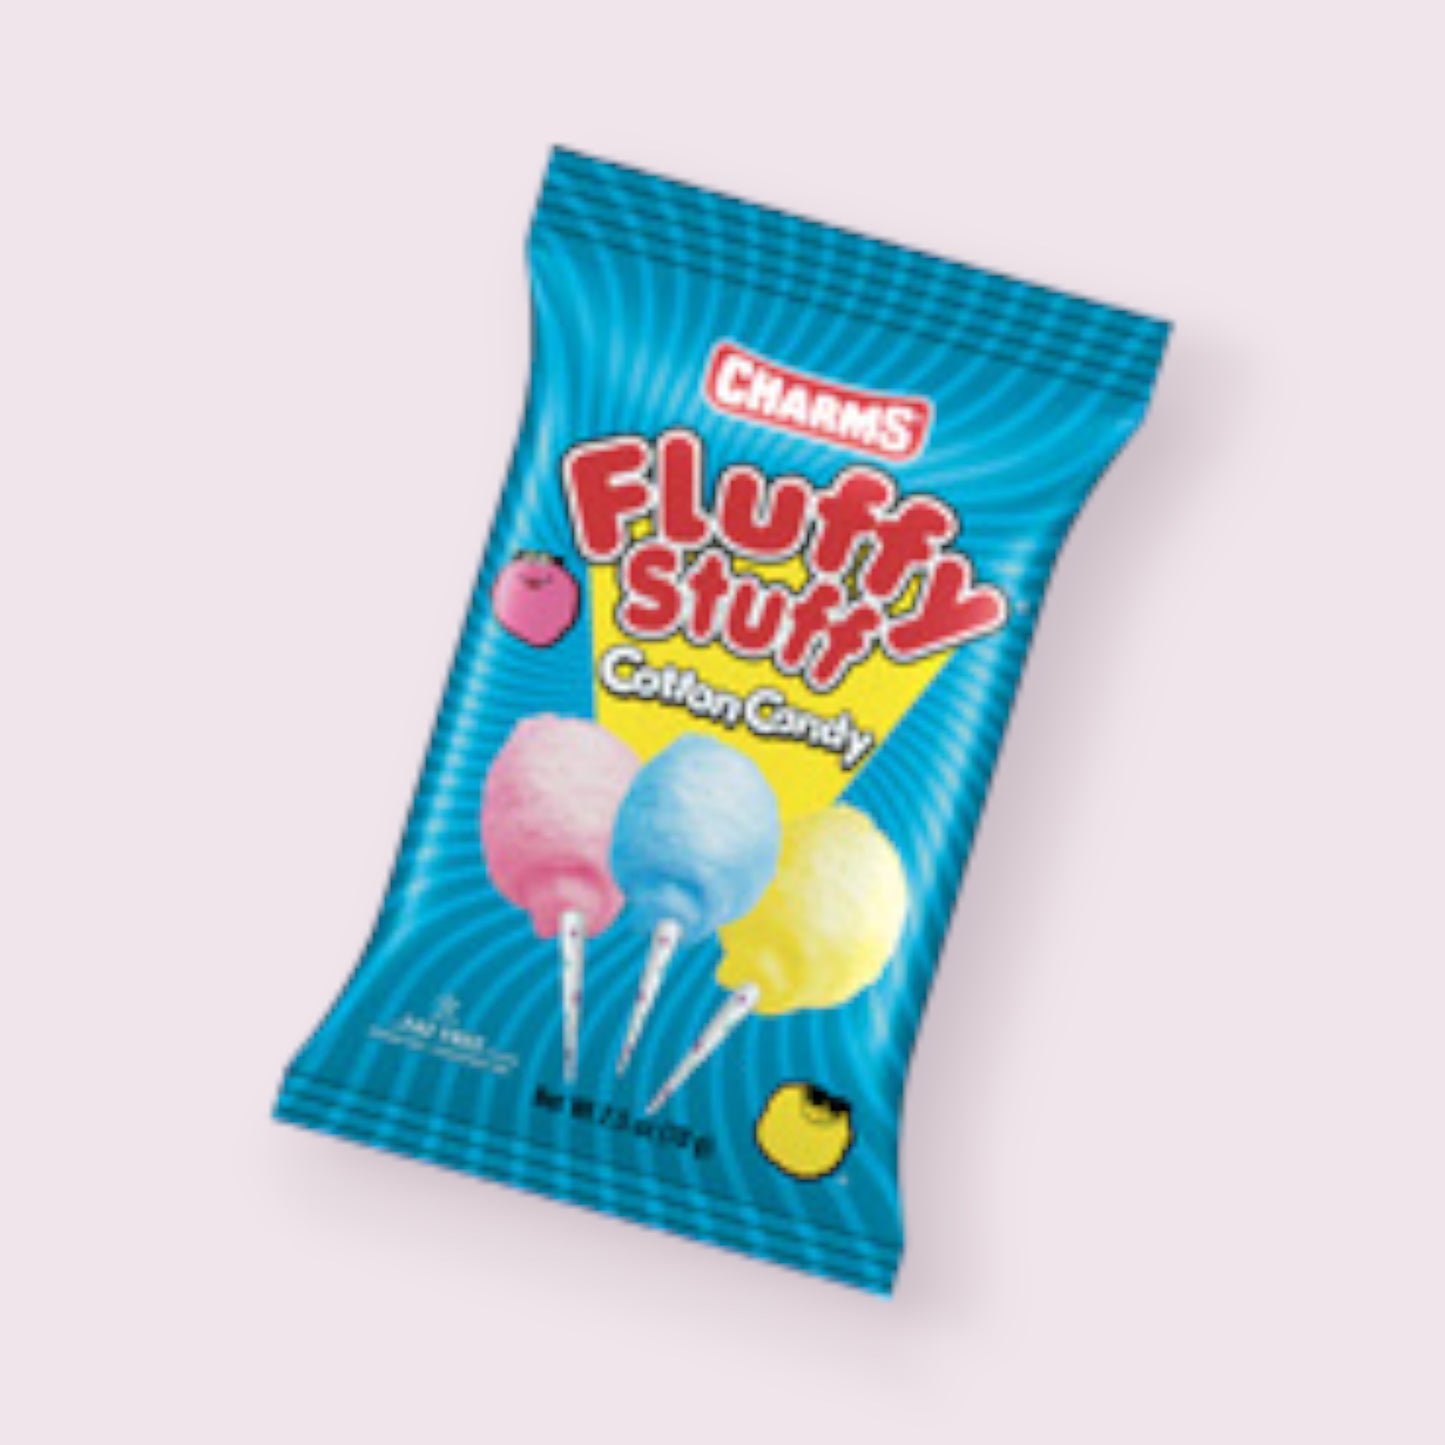 Charms Cotton Candy Bags Essentials Pixie Candy Shoppe   